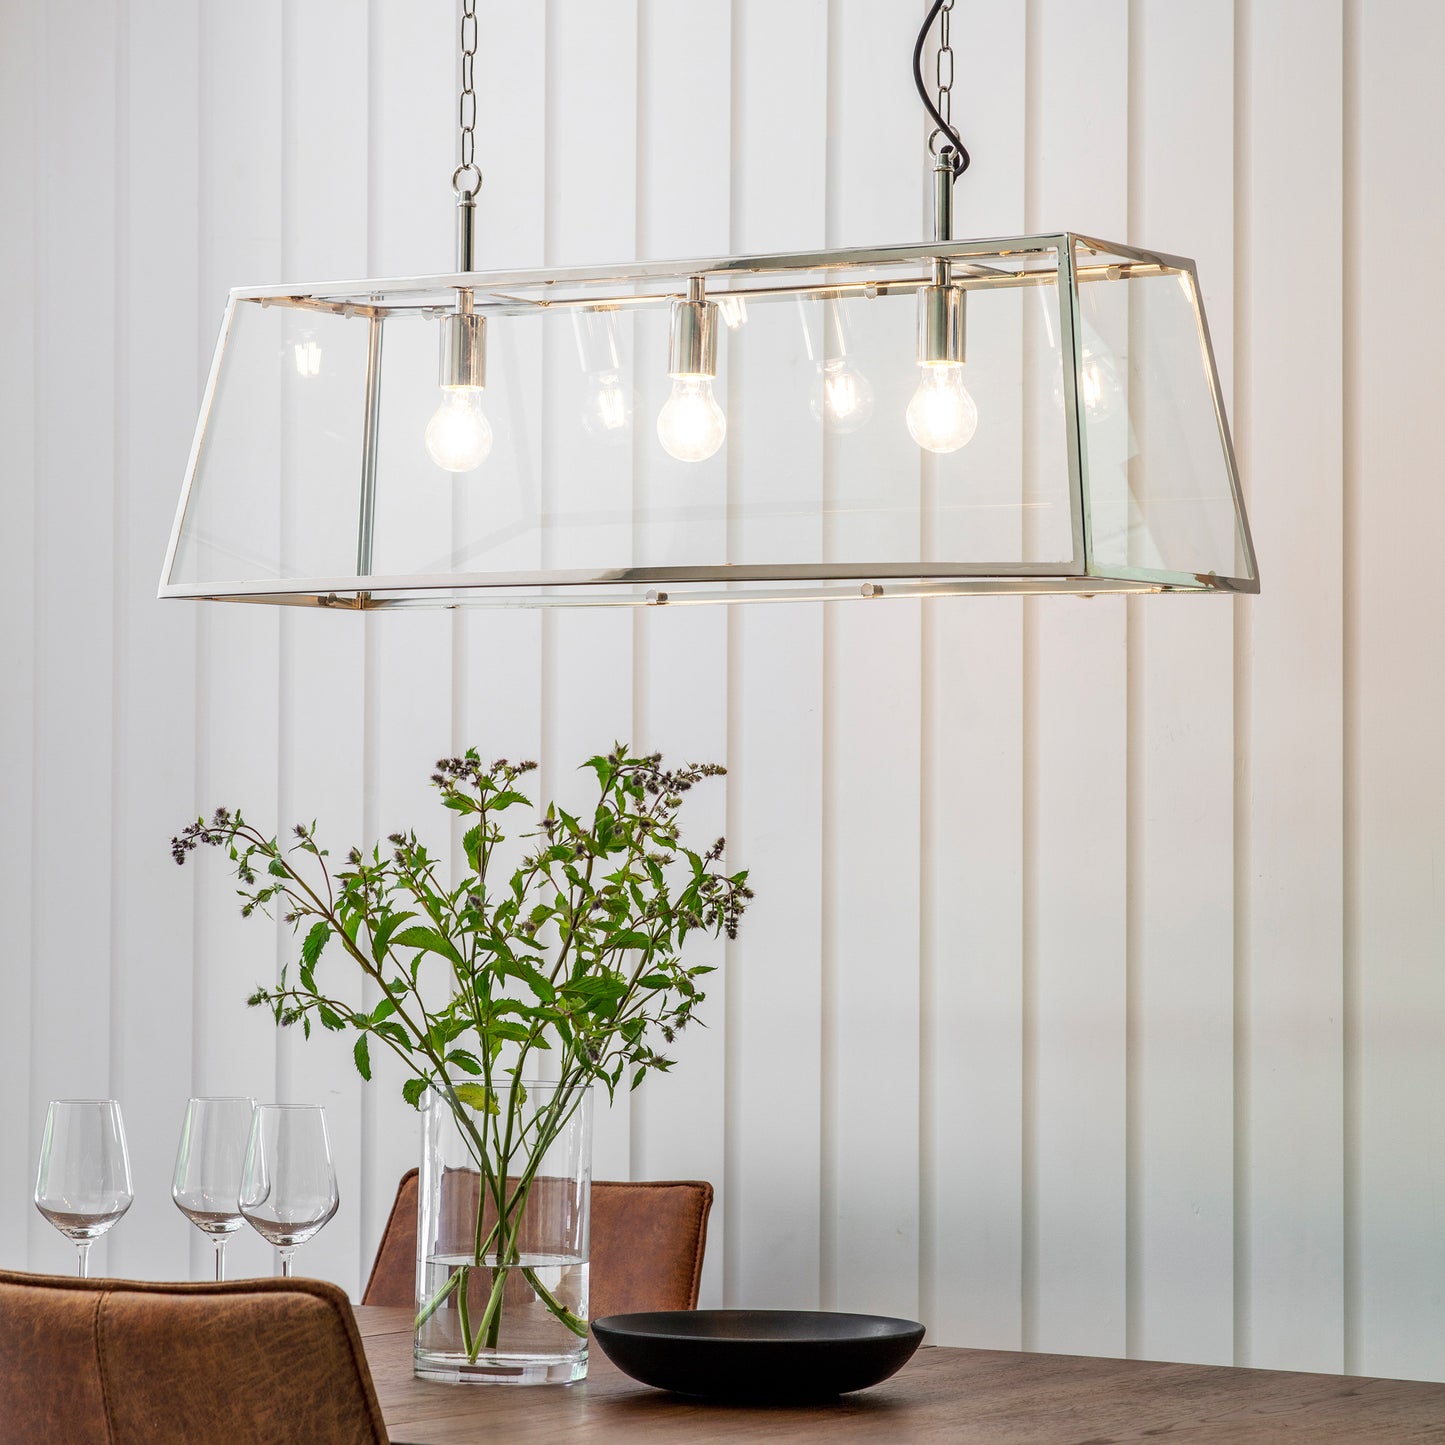 A dining room showcasing interior decor with a Hurst 3 Pendant Light Nickel from Kikiathome.co.uk.